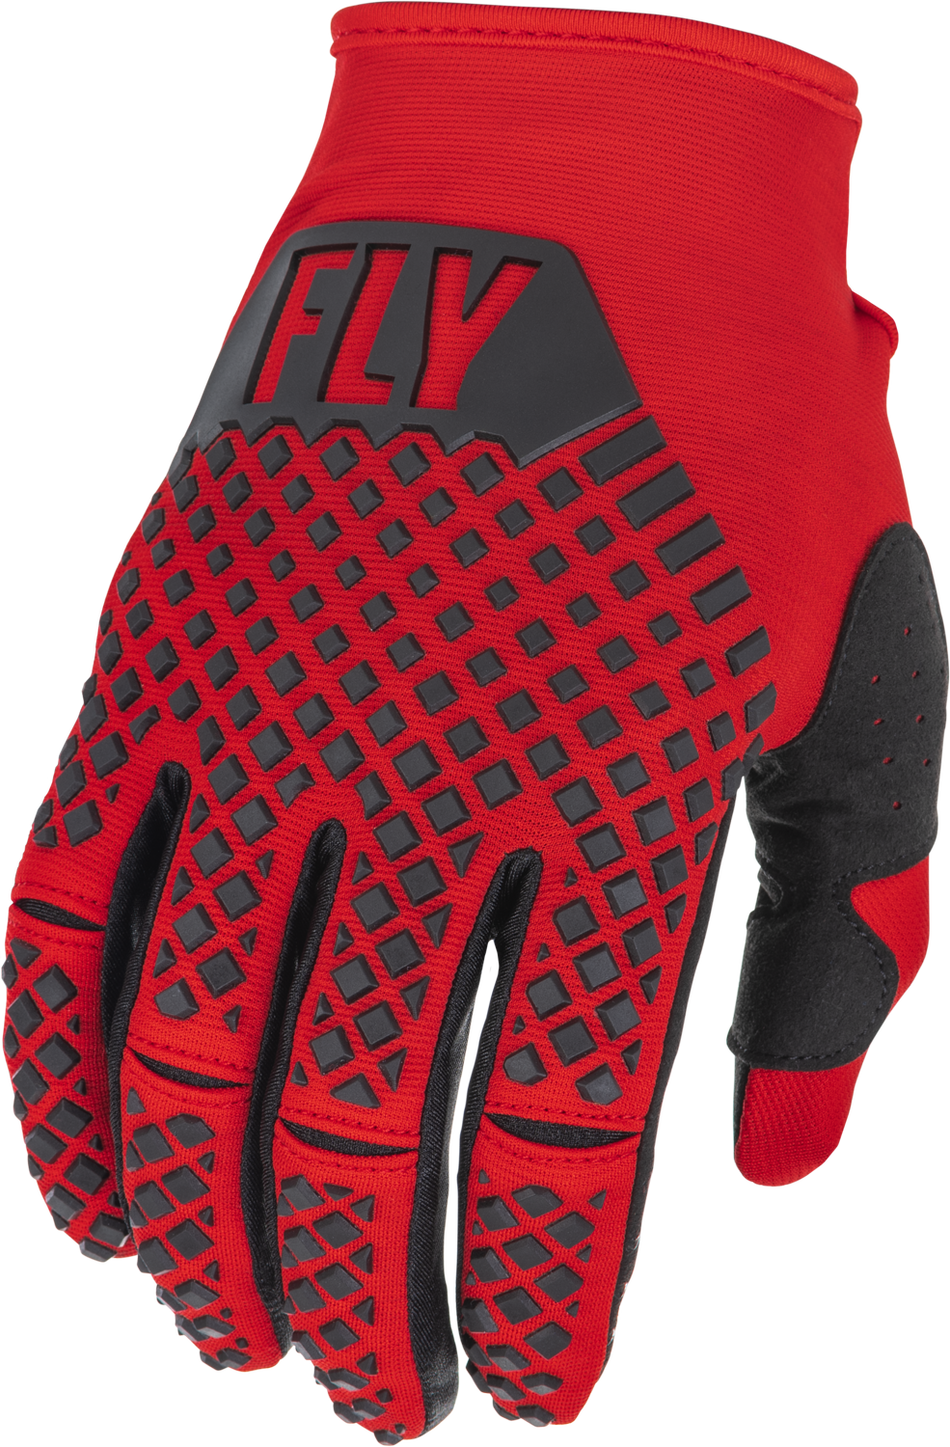 FLY RACING Kinetic Gloves Red/Black Lg 375-413L